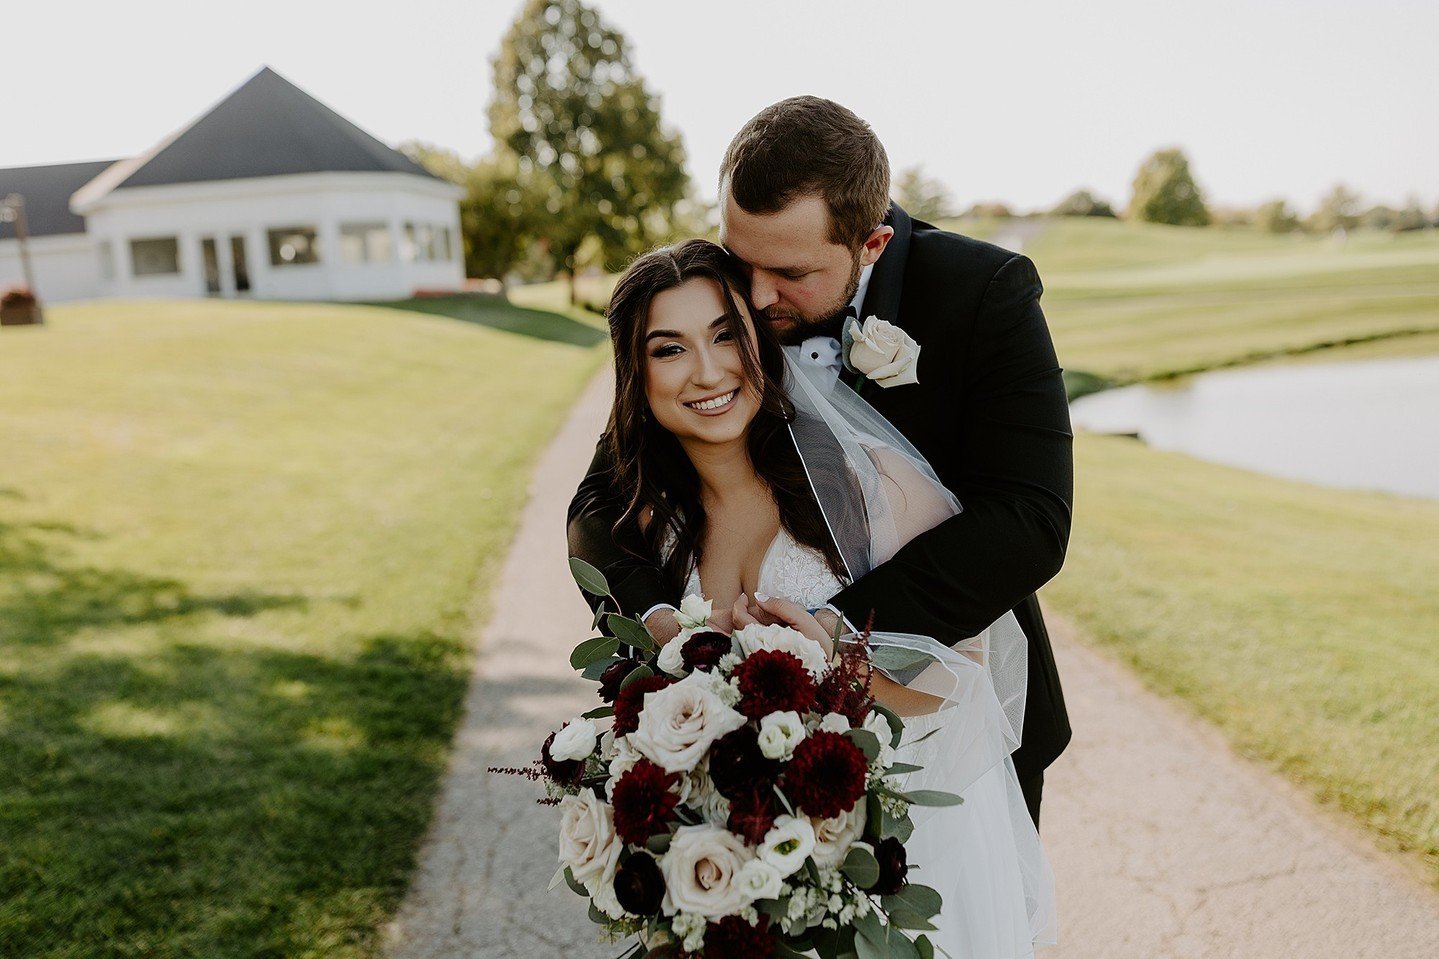 Ever thought about how you'll remember the whirlwind that's your wedding day? With all the planning that goes into this one big, beautiful day, we know you're dreaming of capturing every laugh, tear, and dance move without missing a beat. ⁠
⁠
That's 